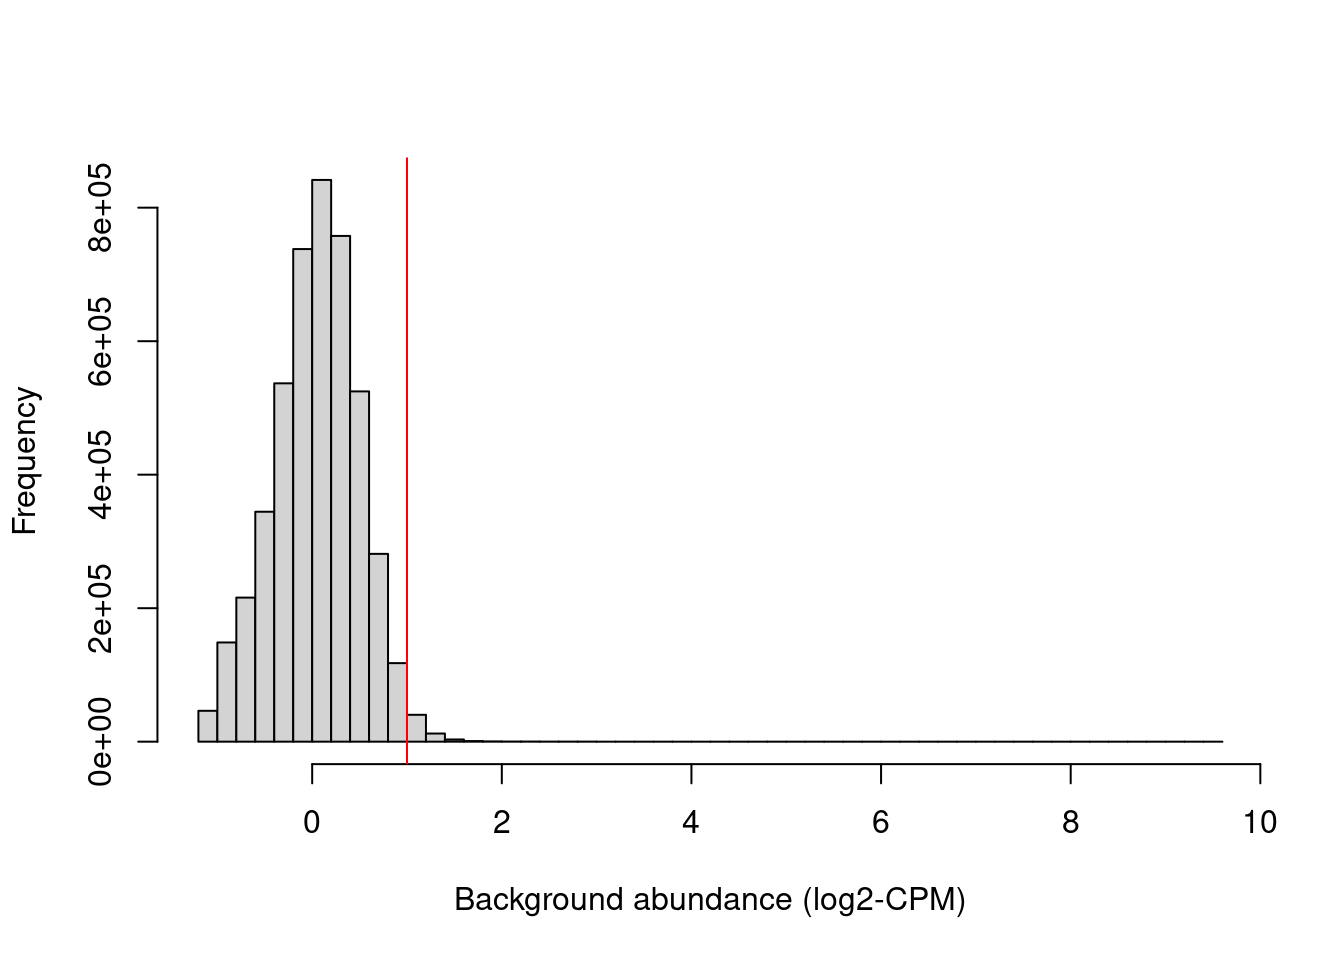 Histogram of average abundances across all 10 kbp genomic bins. The filter threshold is shown as the red line.